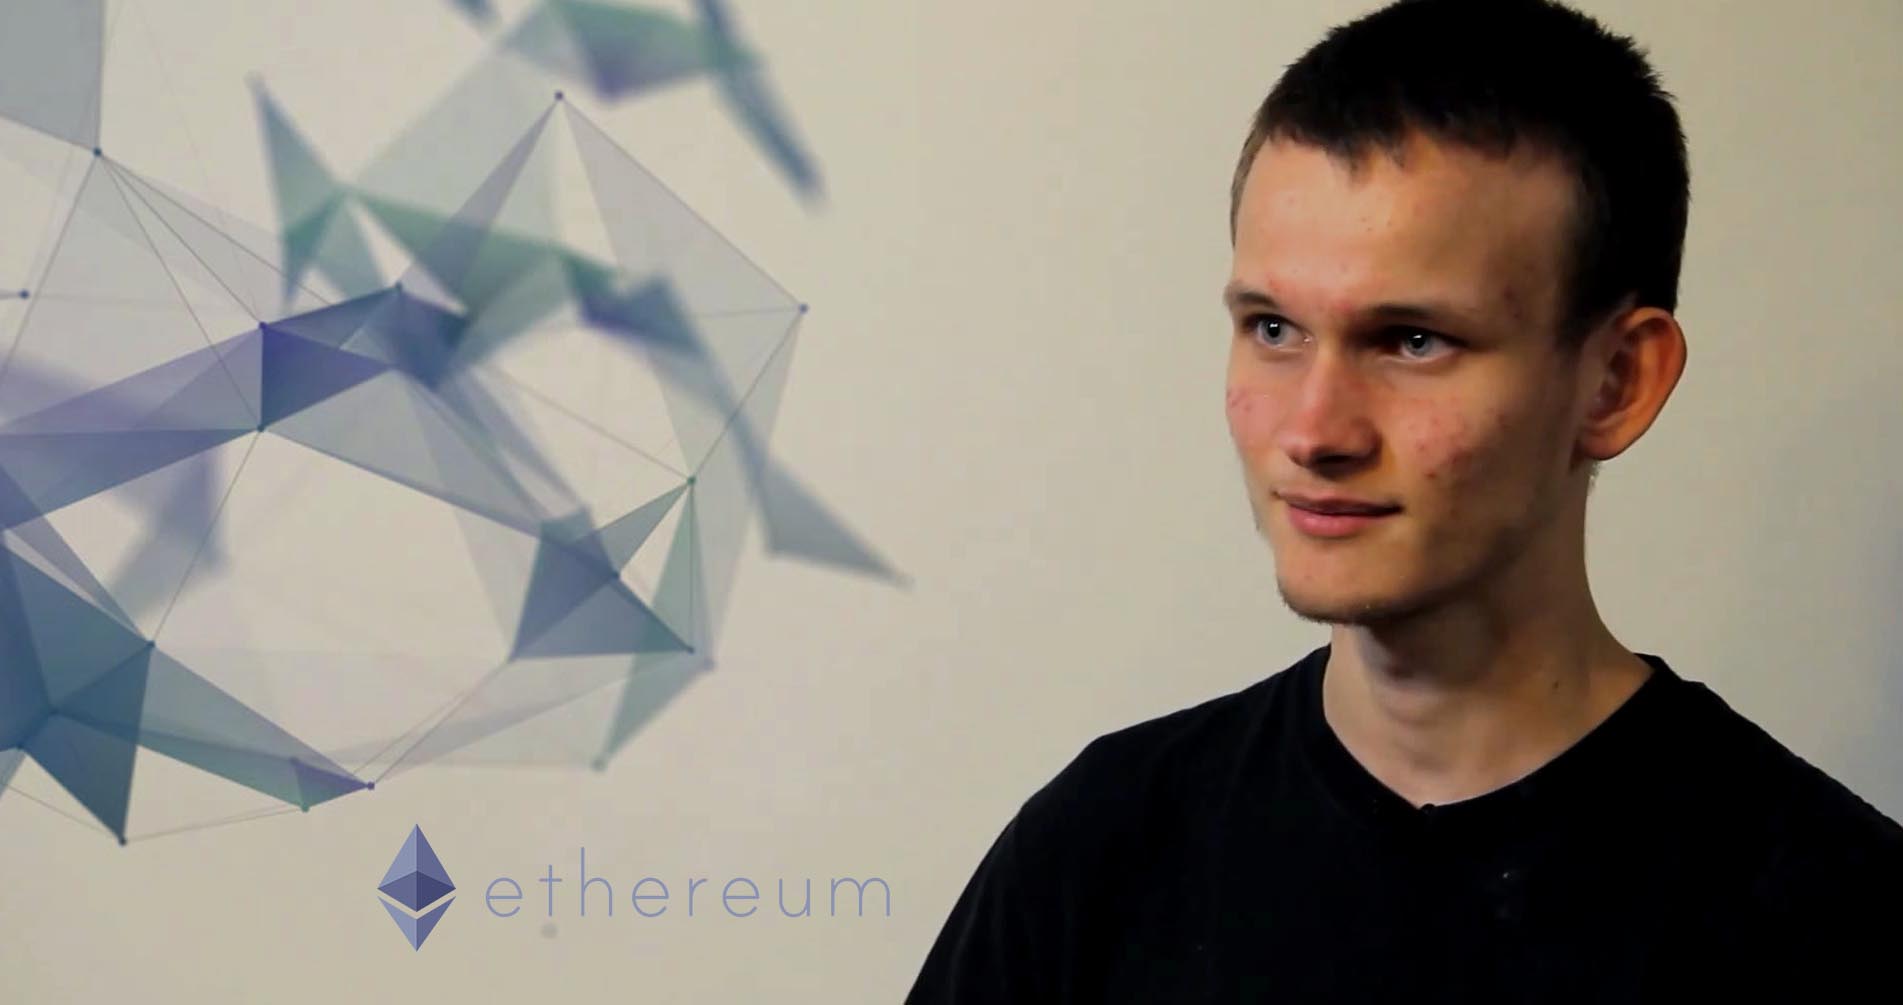 Ethereum Co-Founder Vitalik Buterin Recovers Twitter Account After Sim Swap Attack